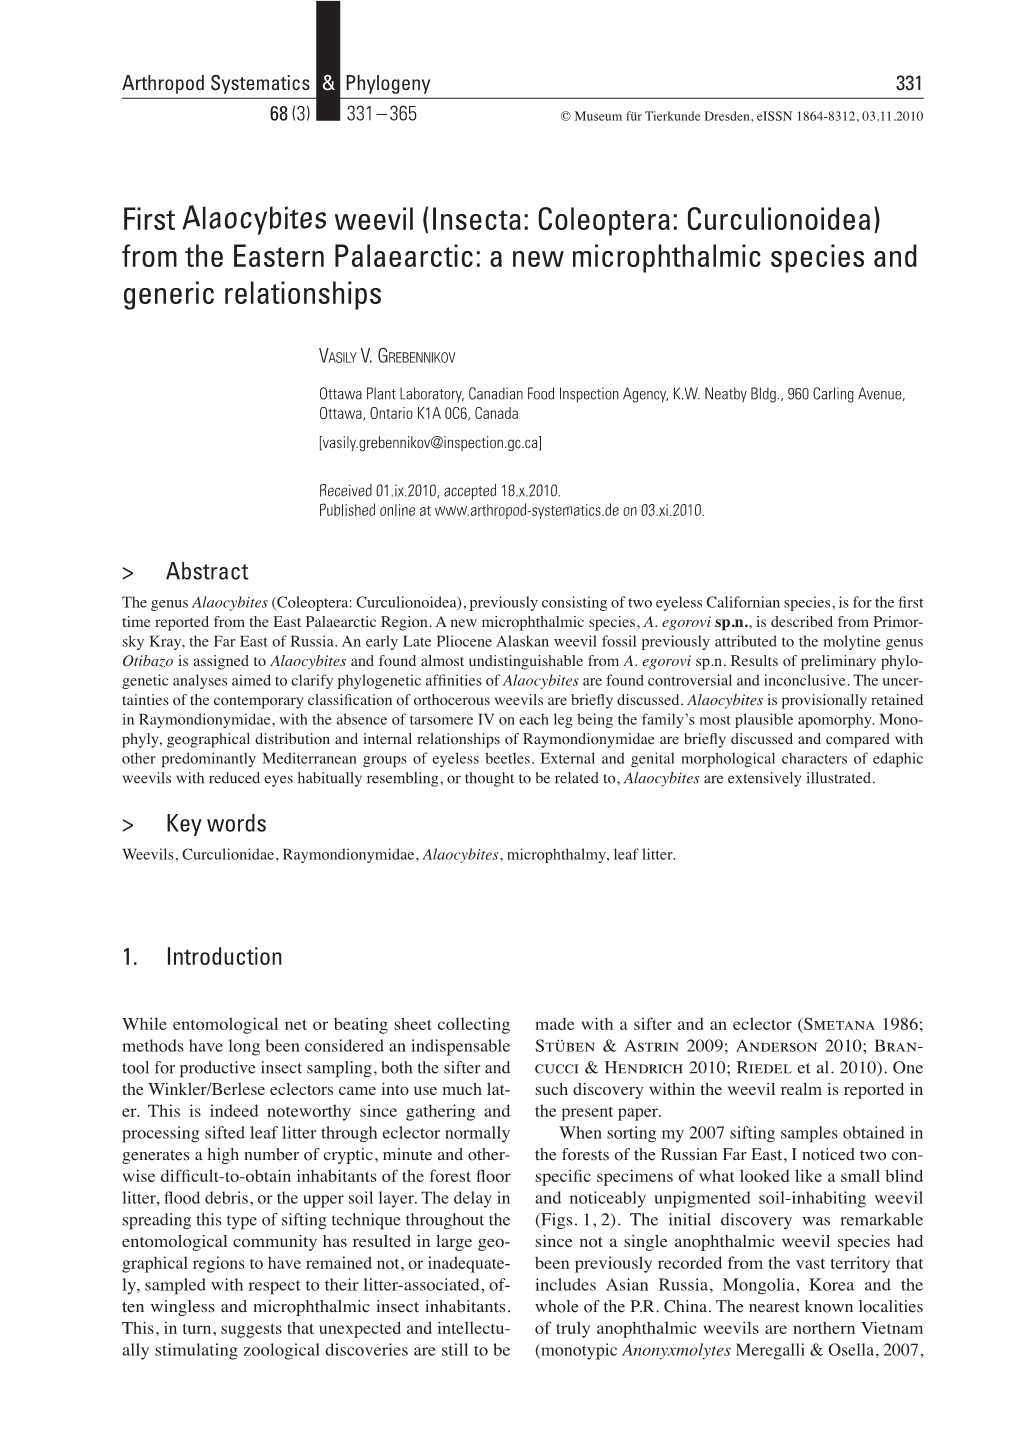 (Insecta: Coleoptera: Curculionoidea) from the Eastern Palaearctic: a New Microphthalmic Species and Generic Relationships